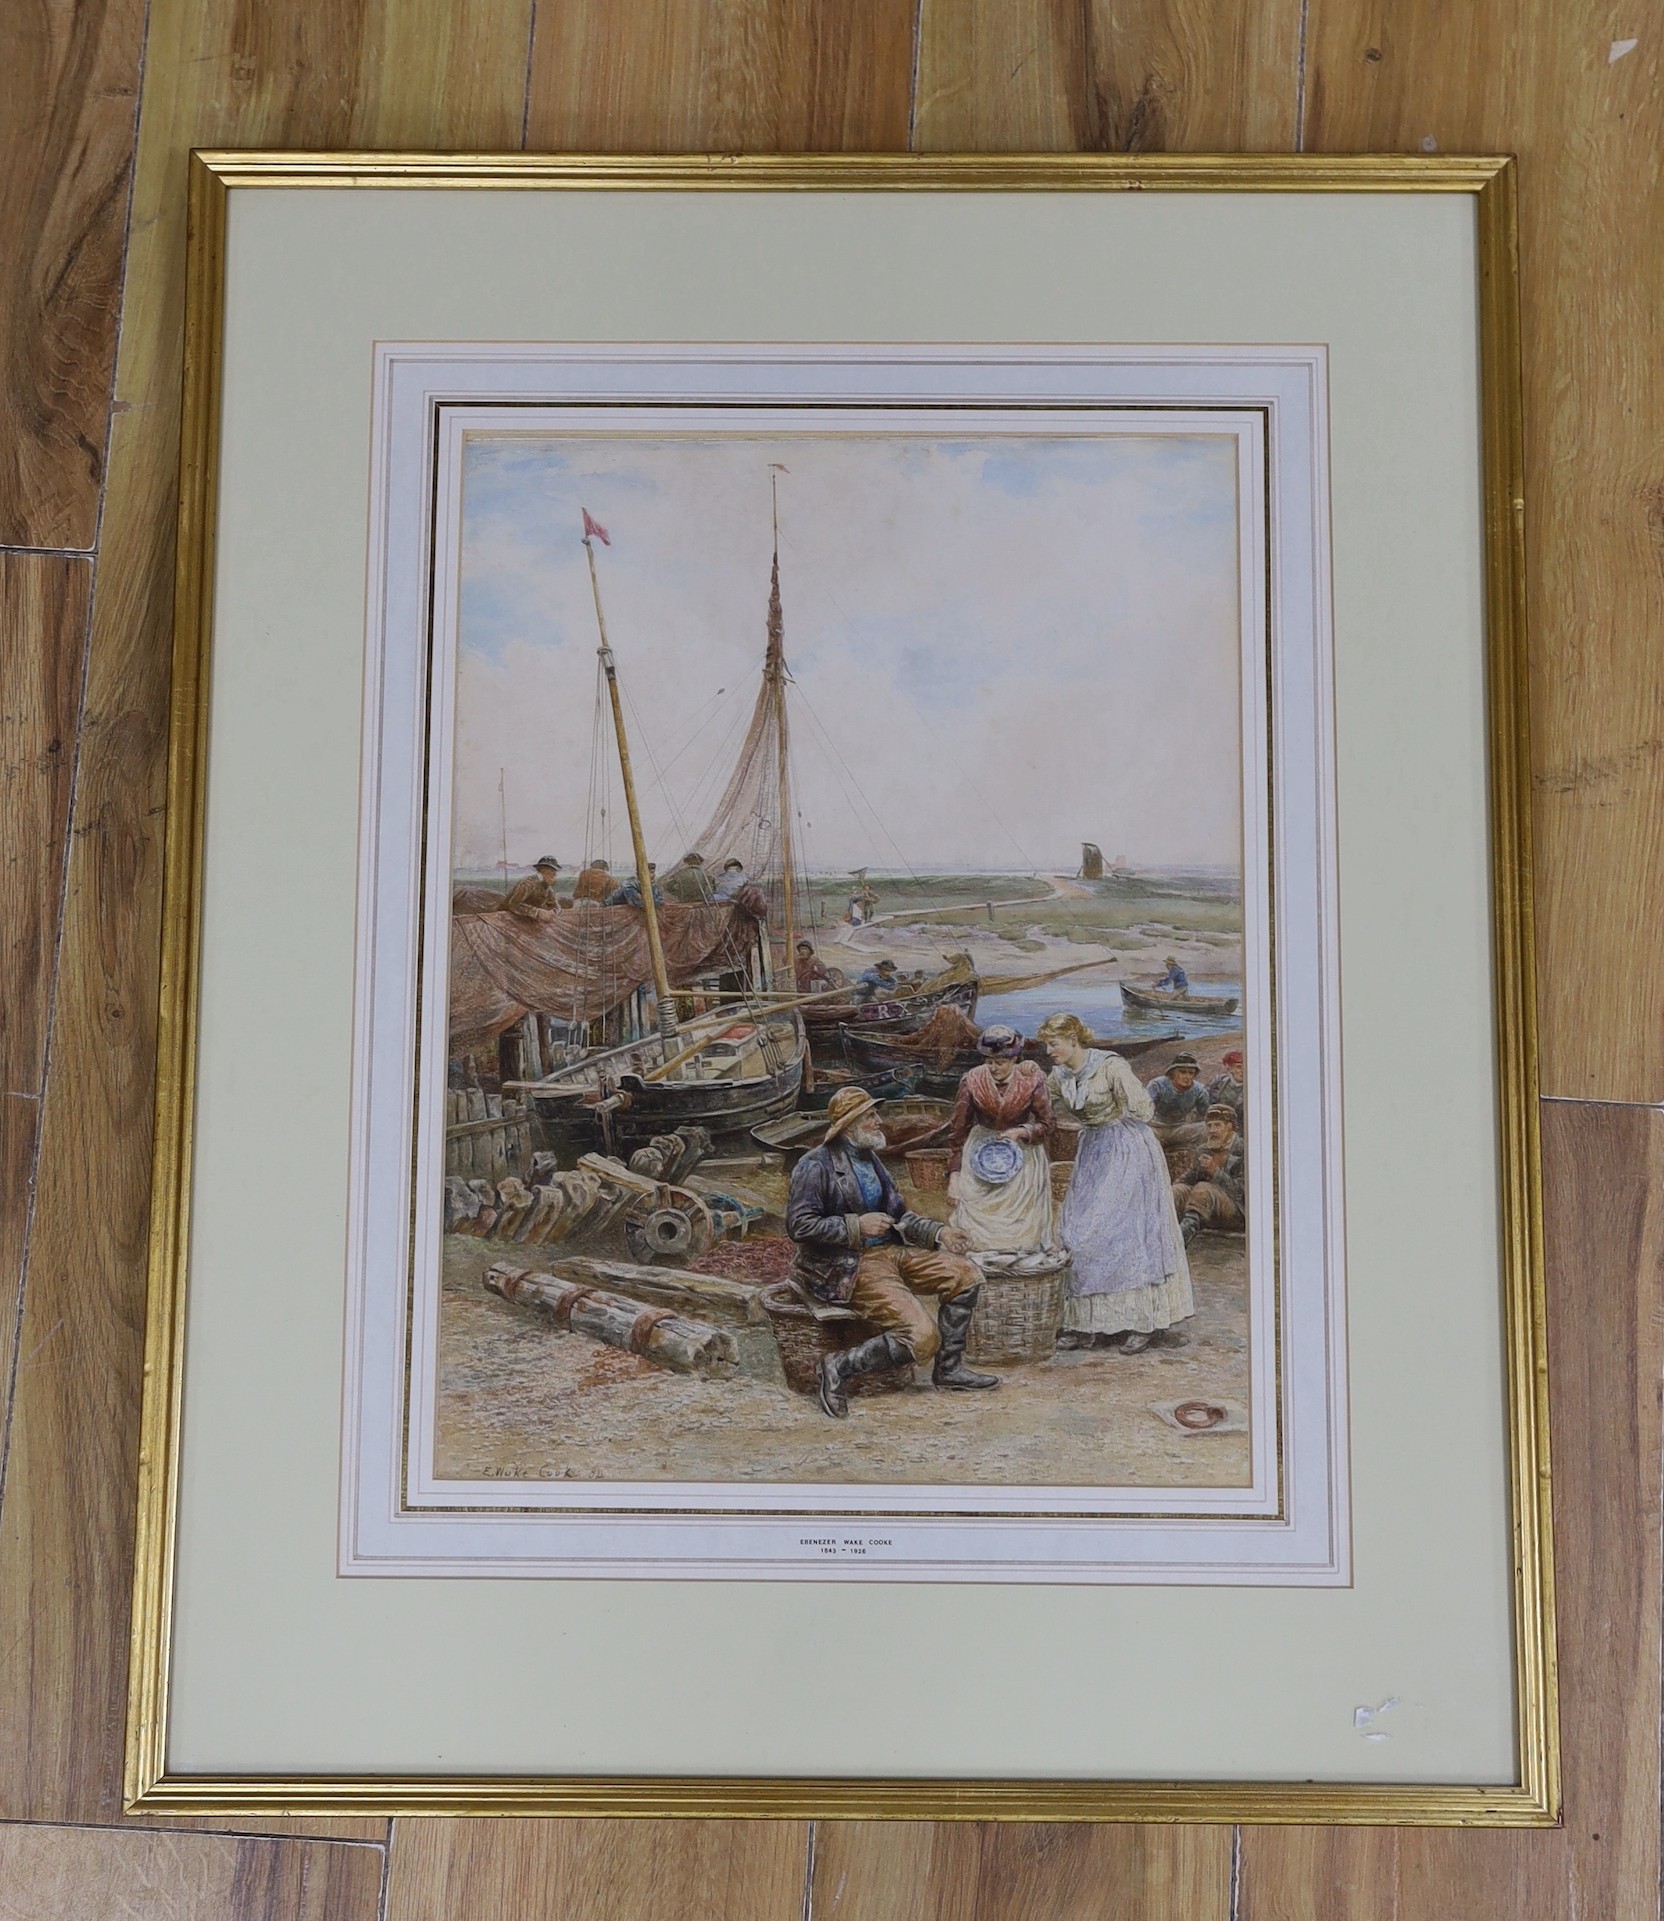 Ebenezer Wake Cooke (1843-1926), watercolour, Selling the day's catch', signed and dated 1884, Agnews label verso, 41 x 31cm